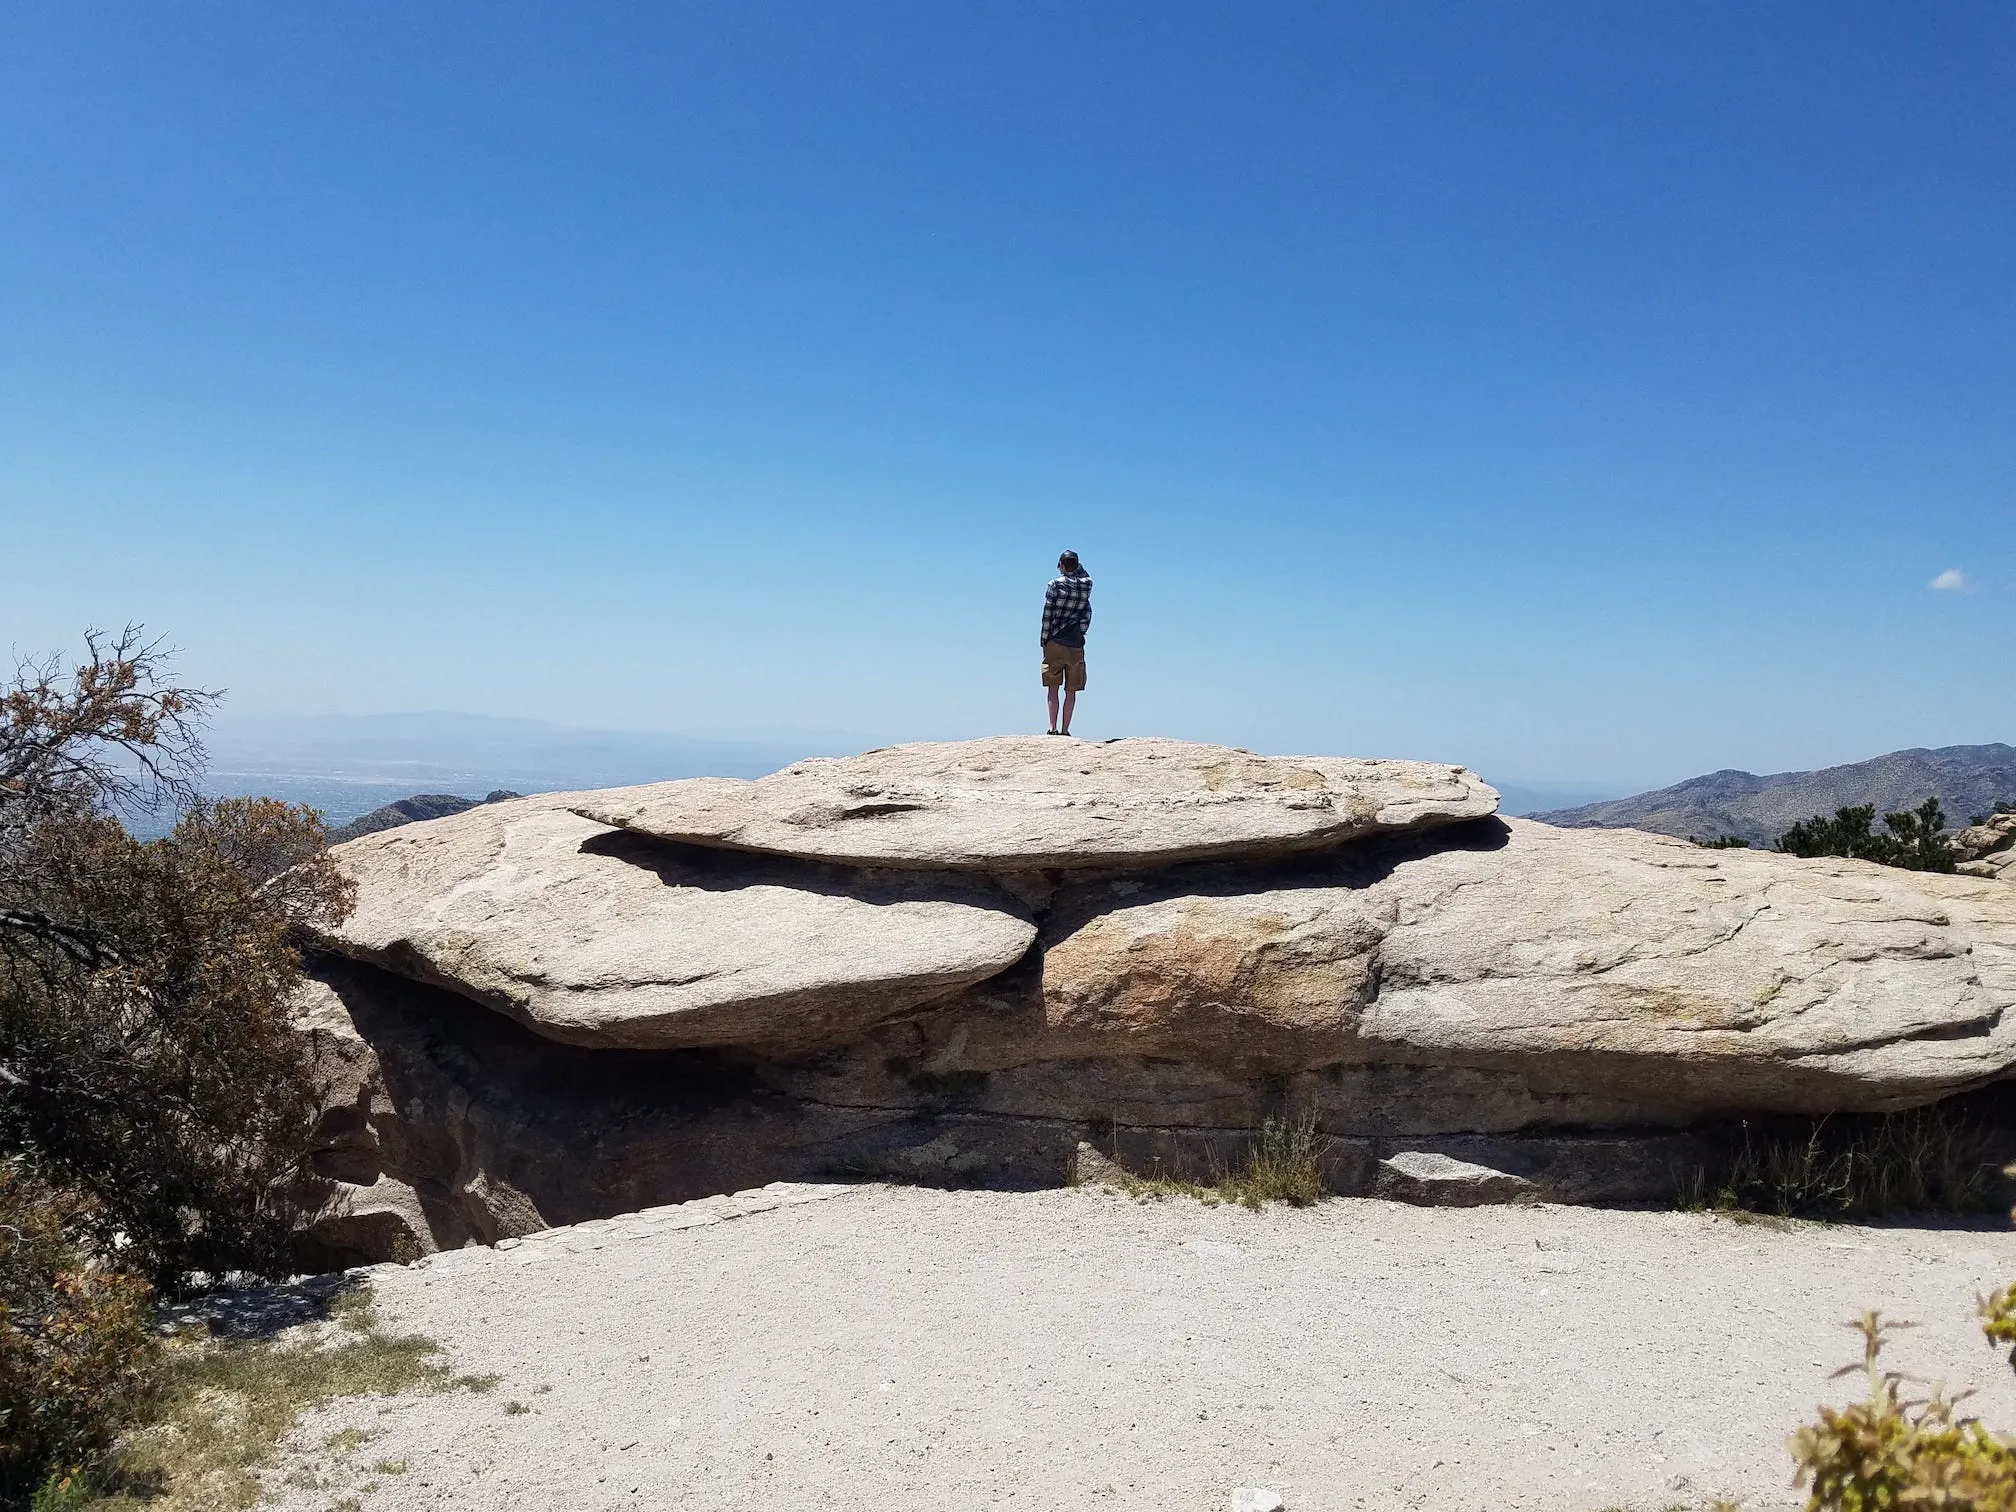 Me, standing on a rock high up in the mountains surrounding Mt. Lemmon. Only the cloudless sky is visible in the background